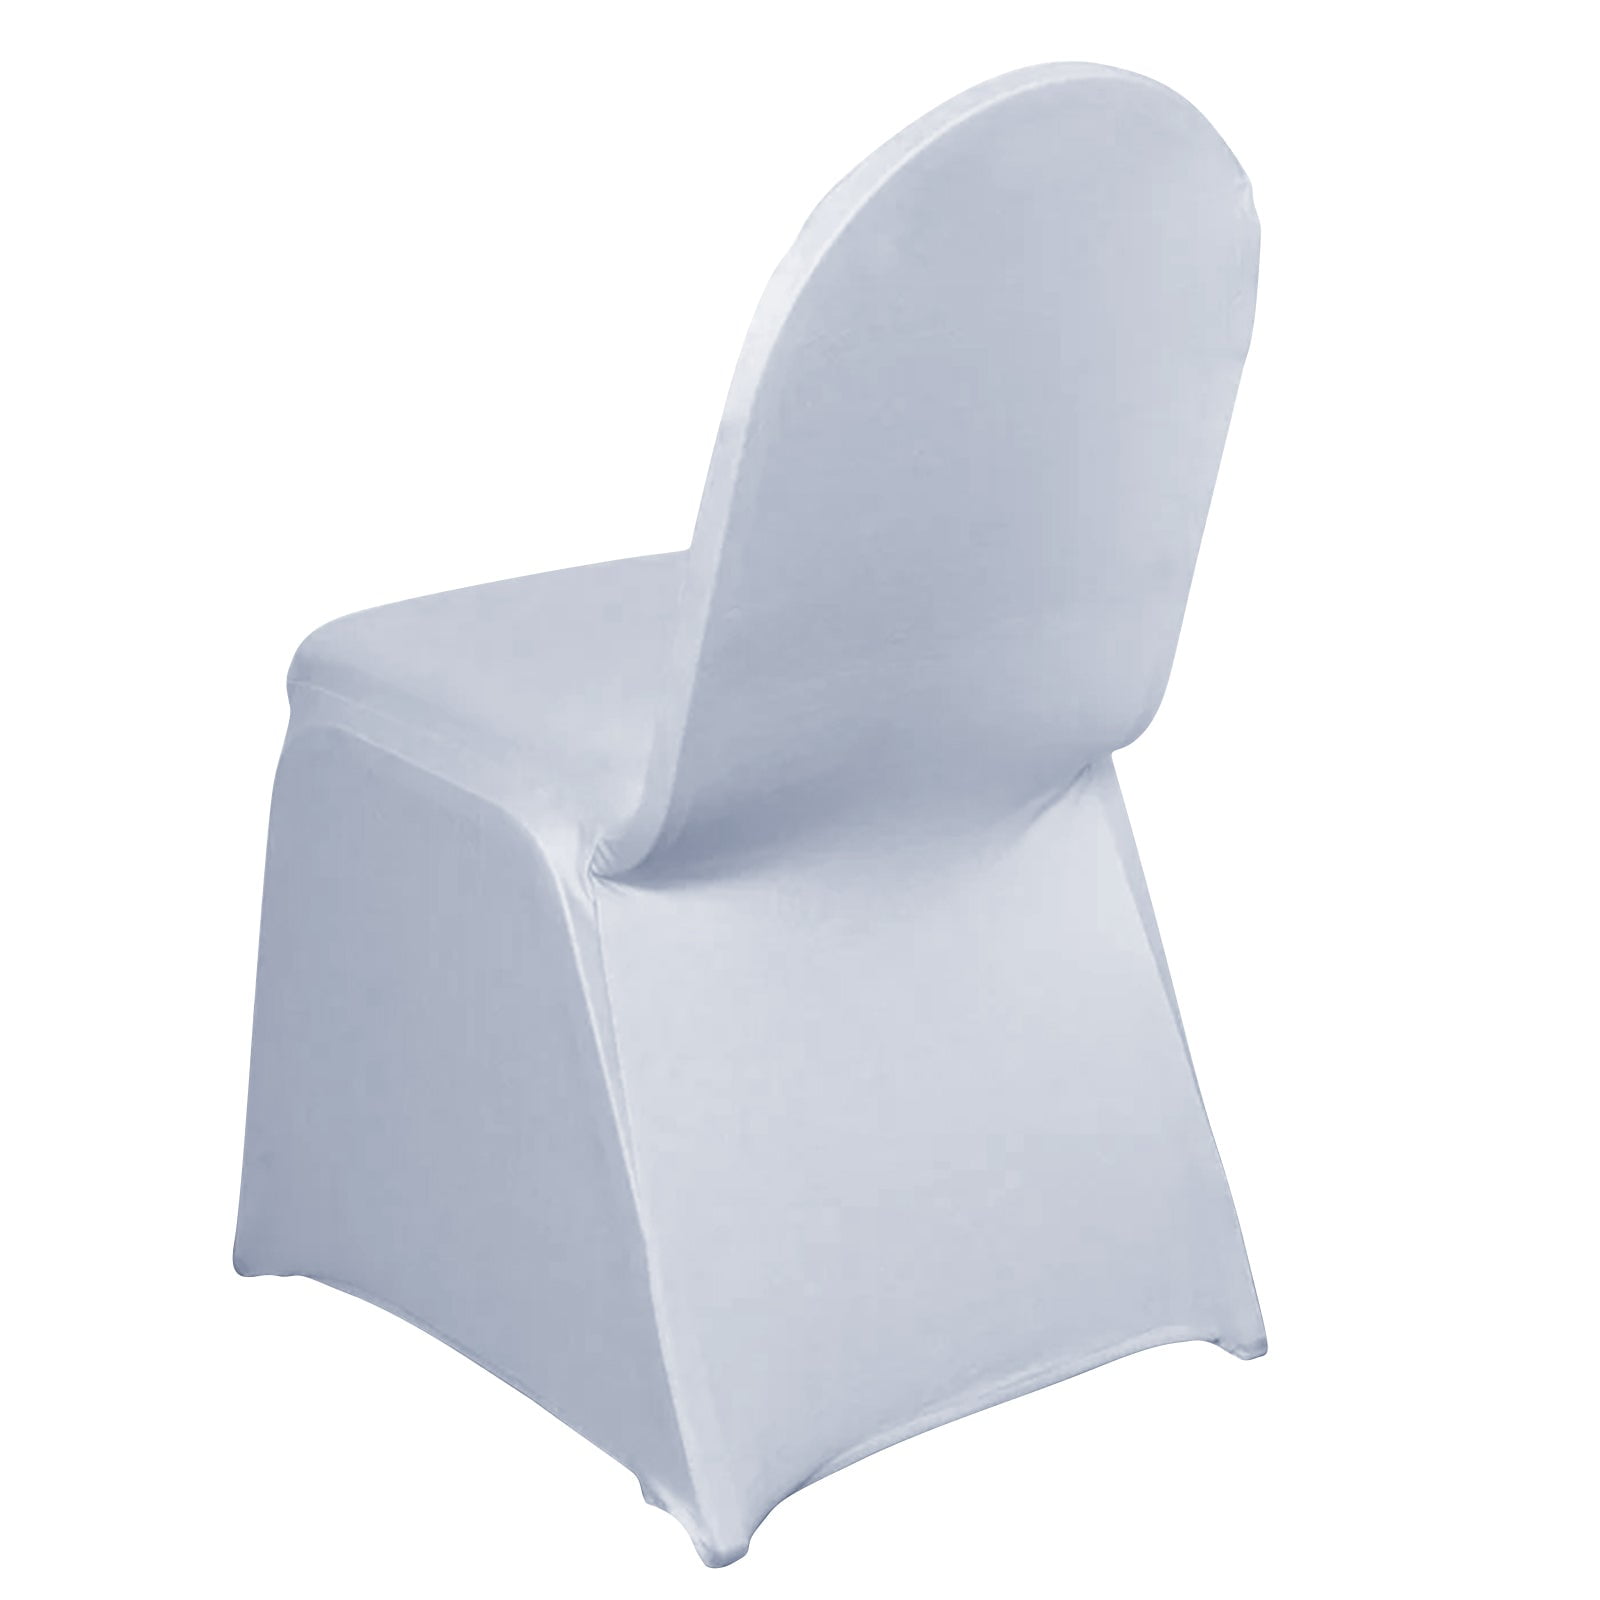 Efavormart 30 PCS White Stretchy Spandex Fitted Banquet Chair